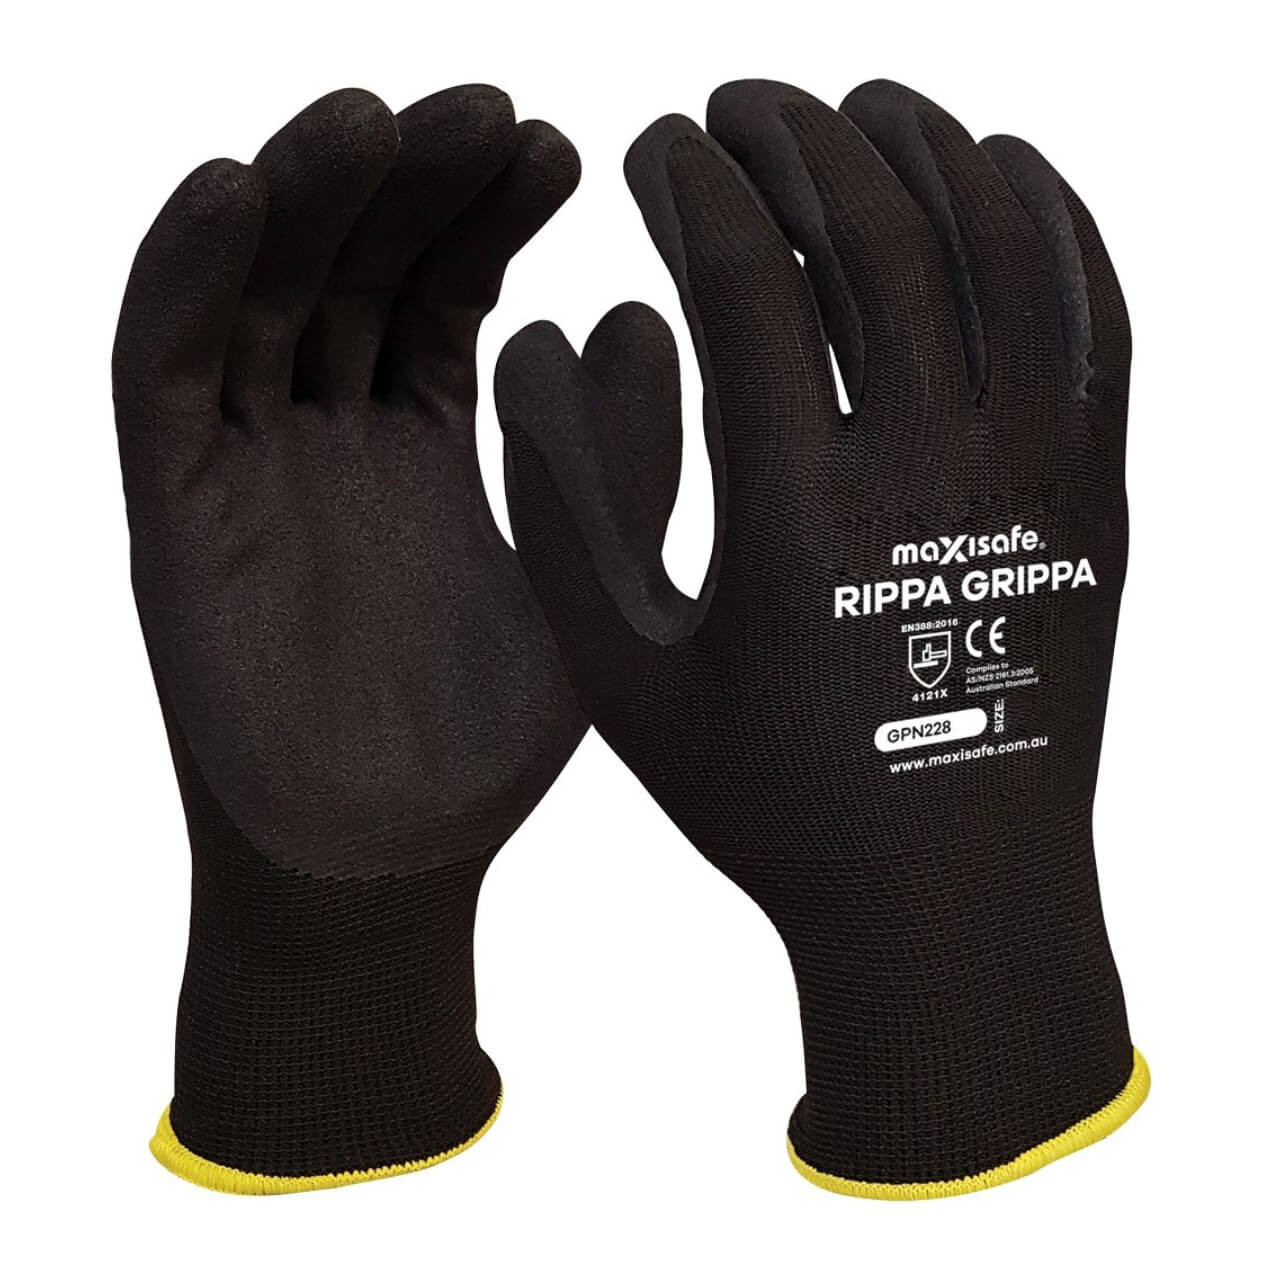 Maxisafe Rippa Grippa' Black Nitrile Coated Synthetic Glove S